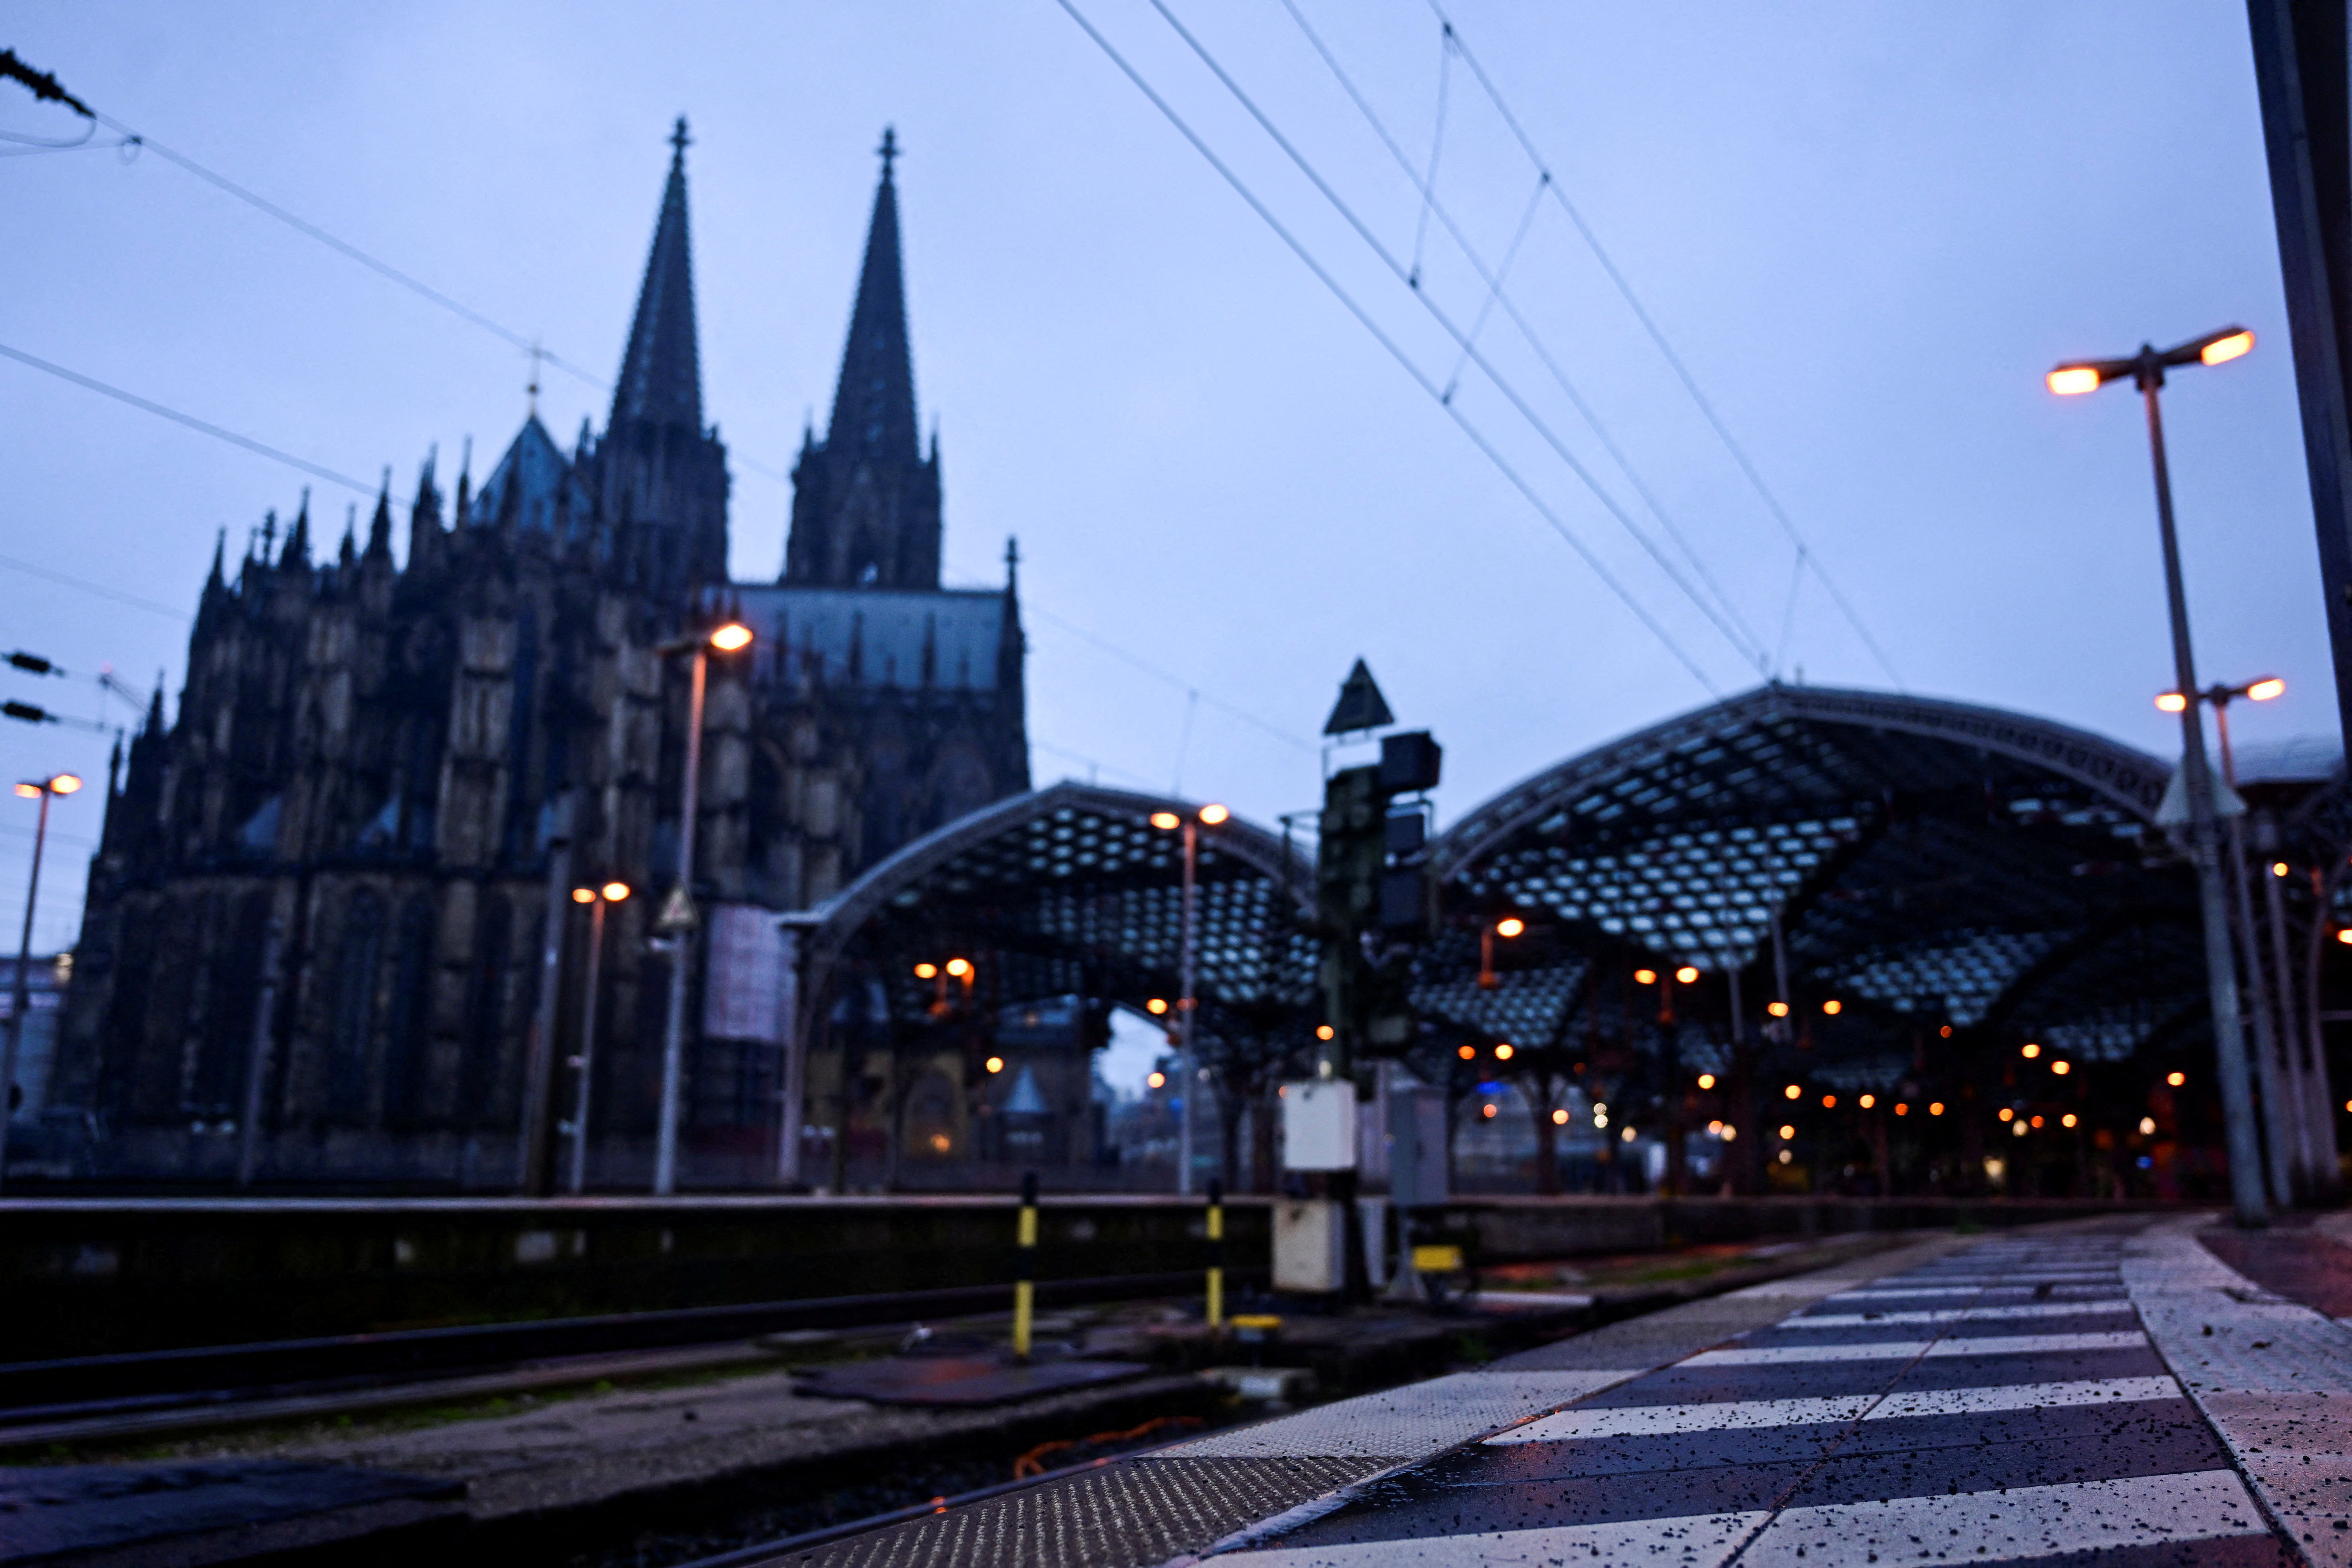 Nationwide strike called by German's train drivers union GDL over wage increases, in Cologne